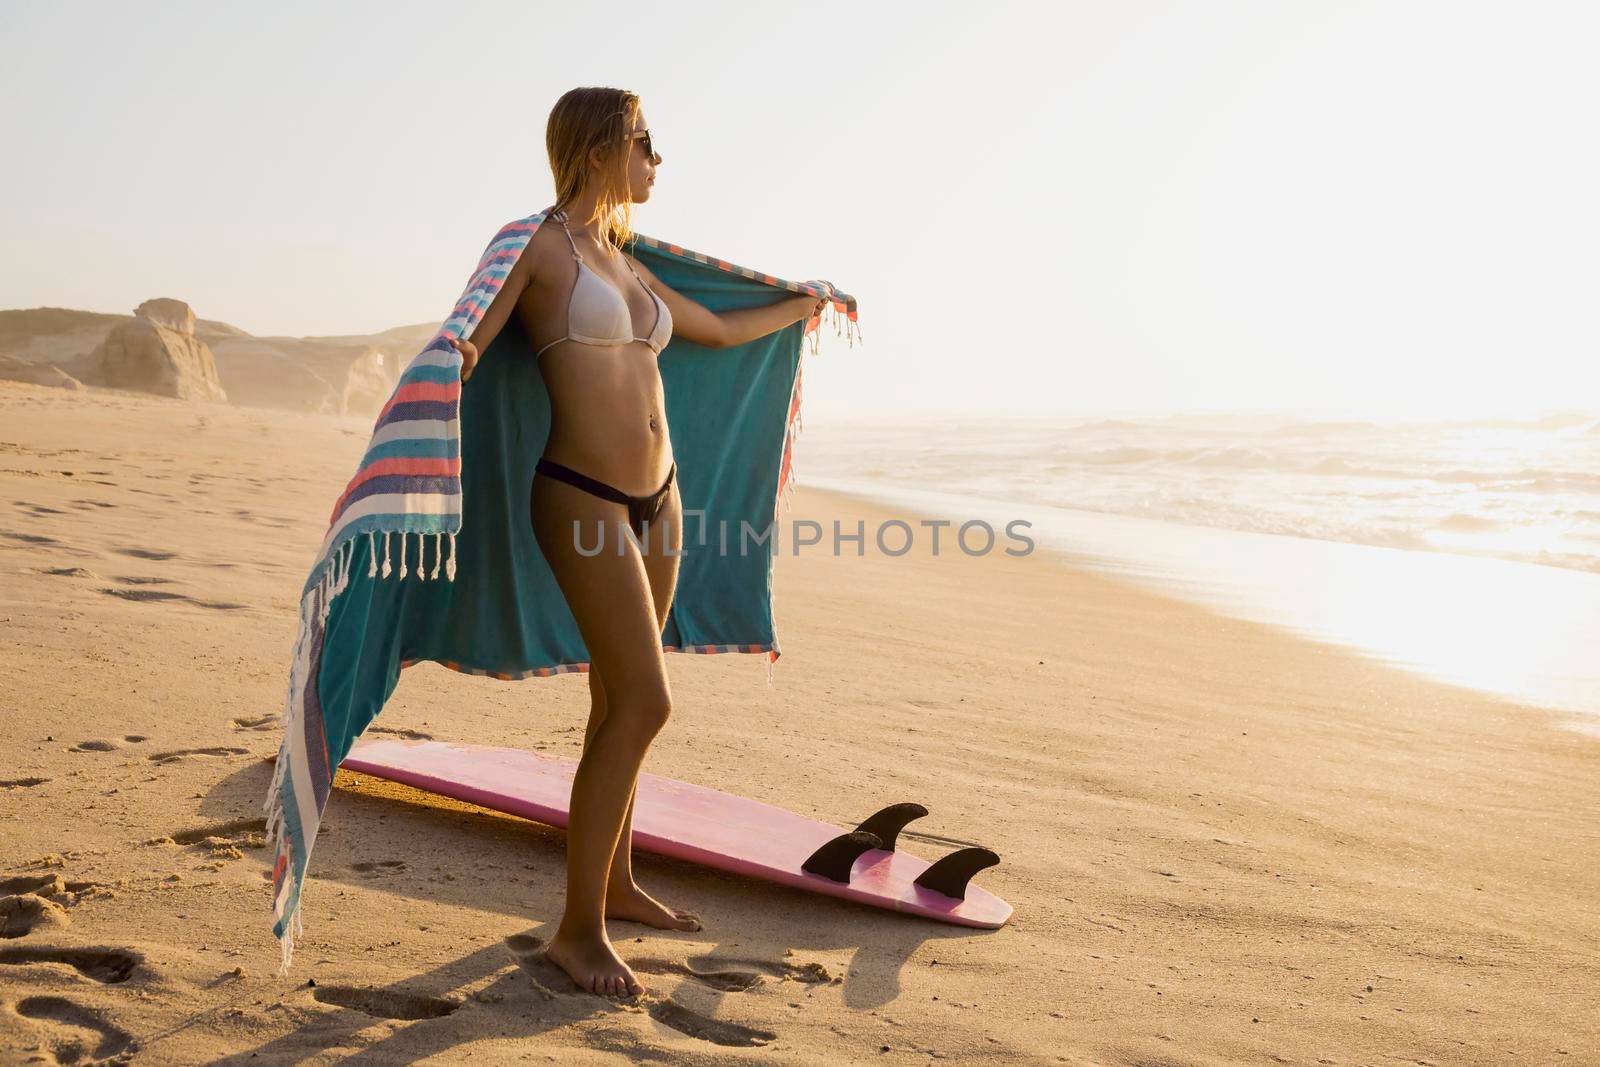 A beautiful girl at the beach with her bodyboard